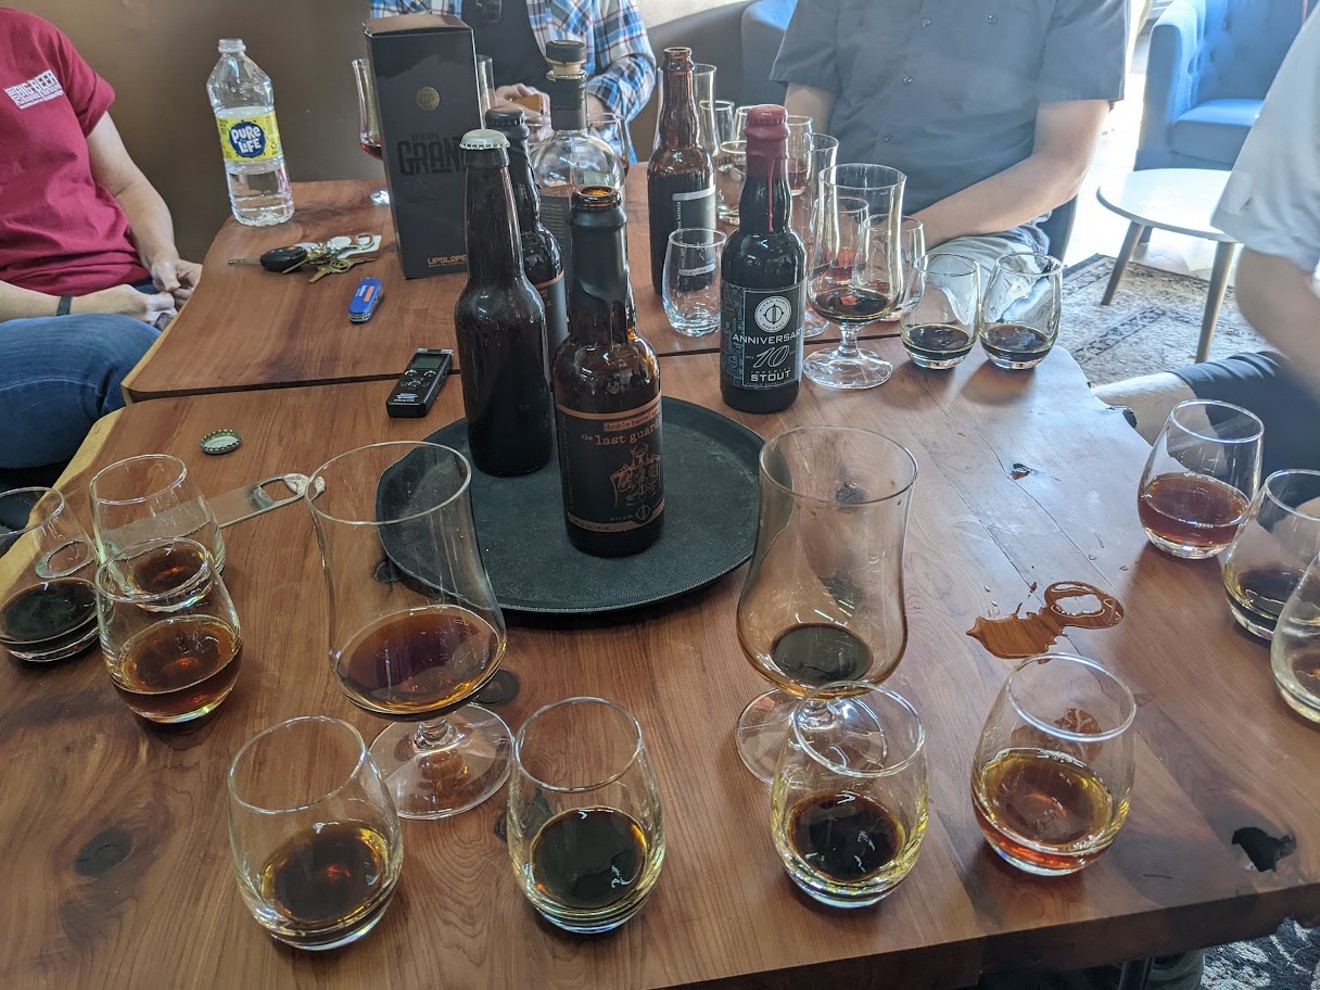 Sharing with a group is the best way to sample these complex beers.